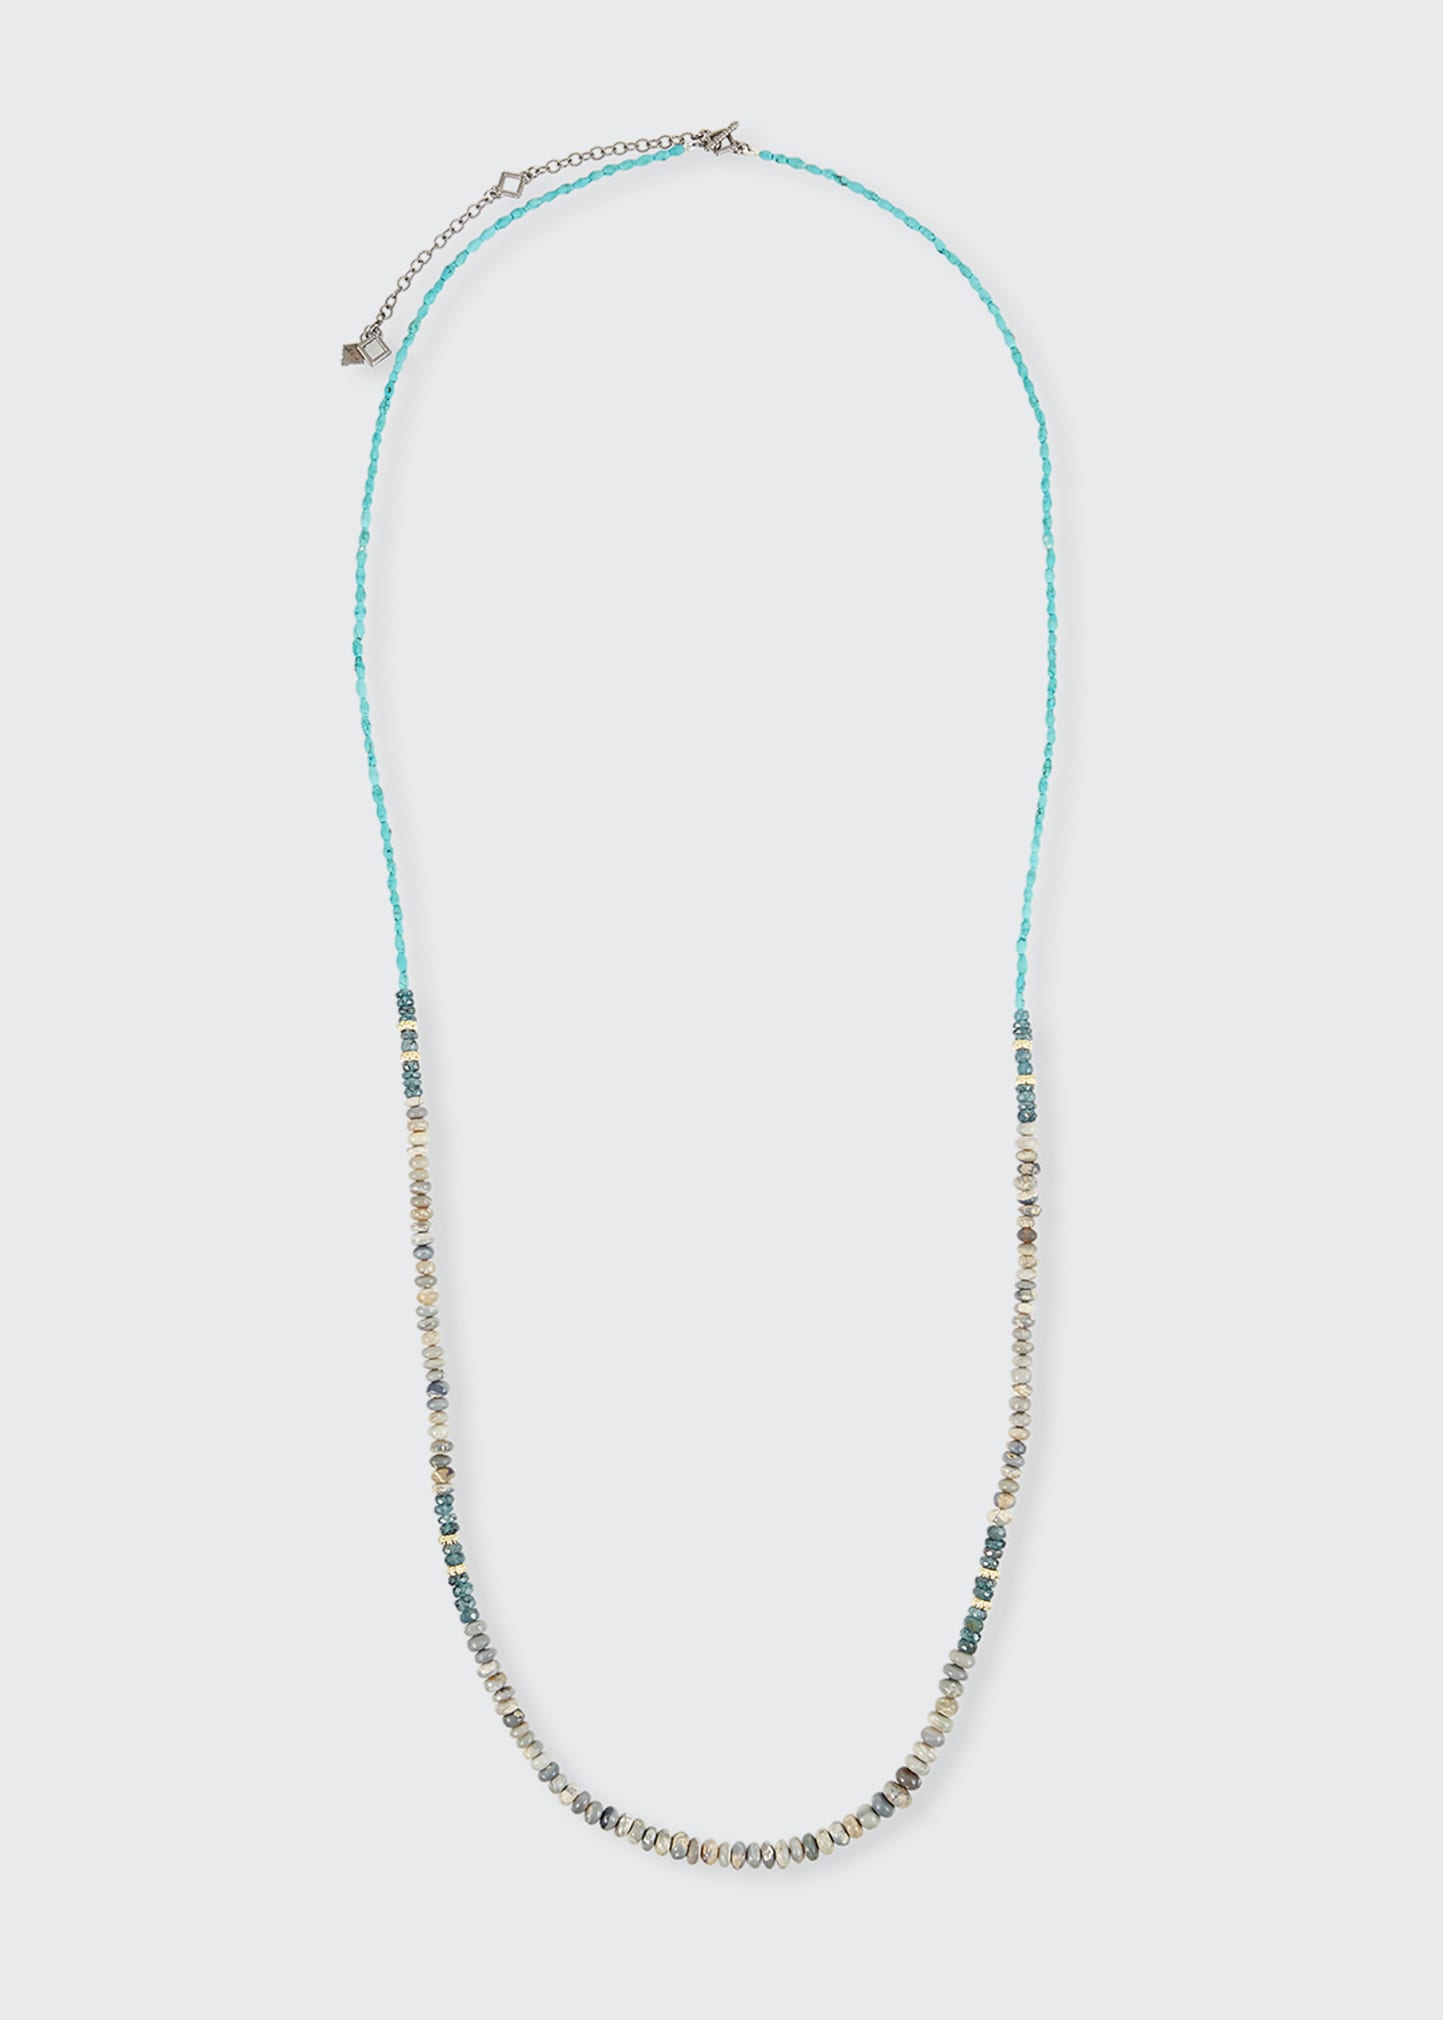 Armenta Old World Long Turquoise, Opal & Kyanite Necklace